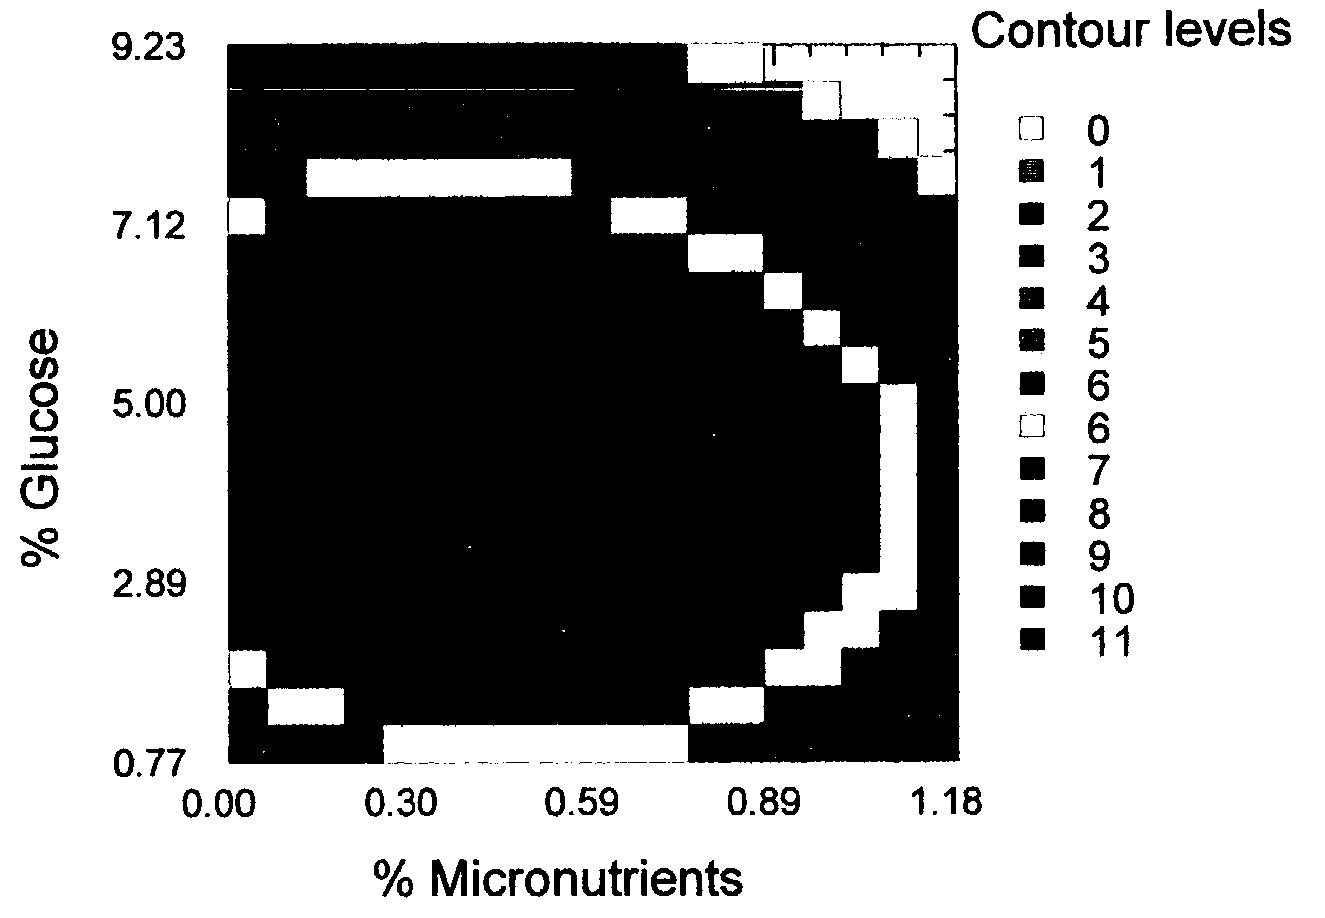 Materials and methods for in vitro production of bacteria